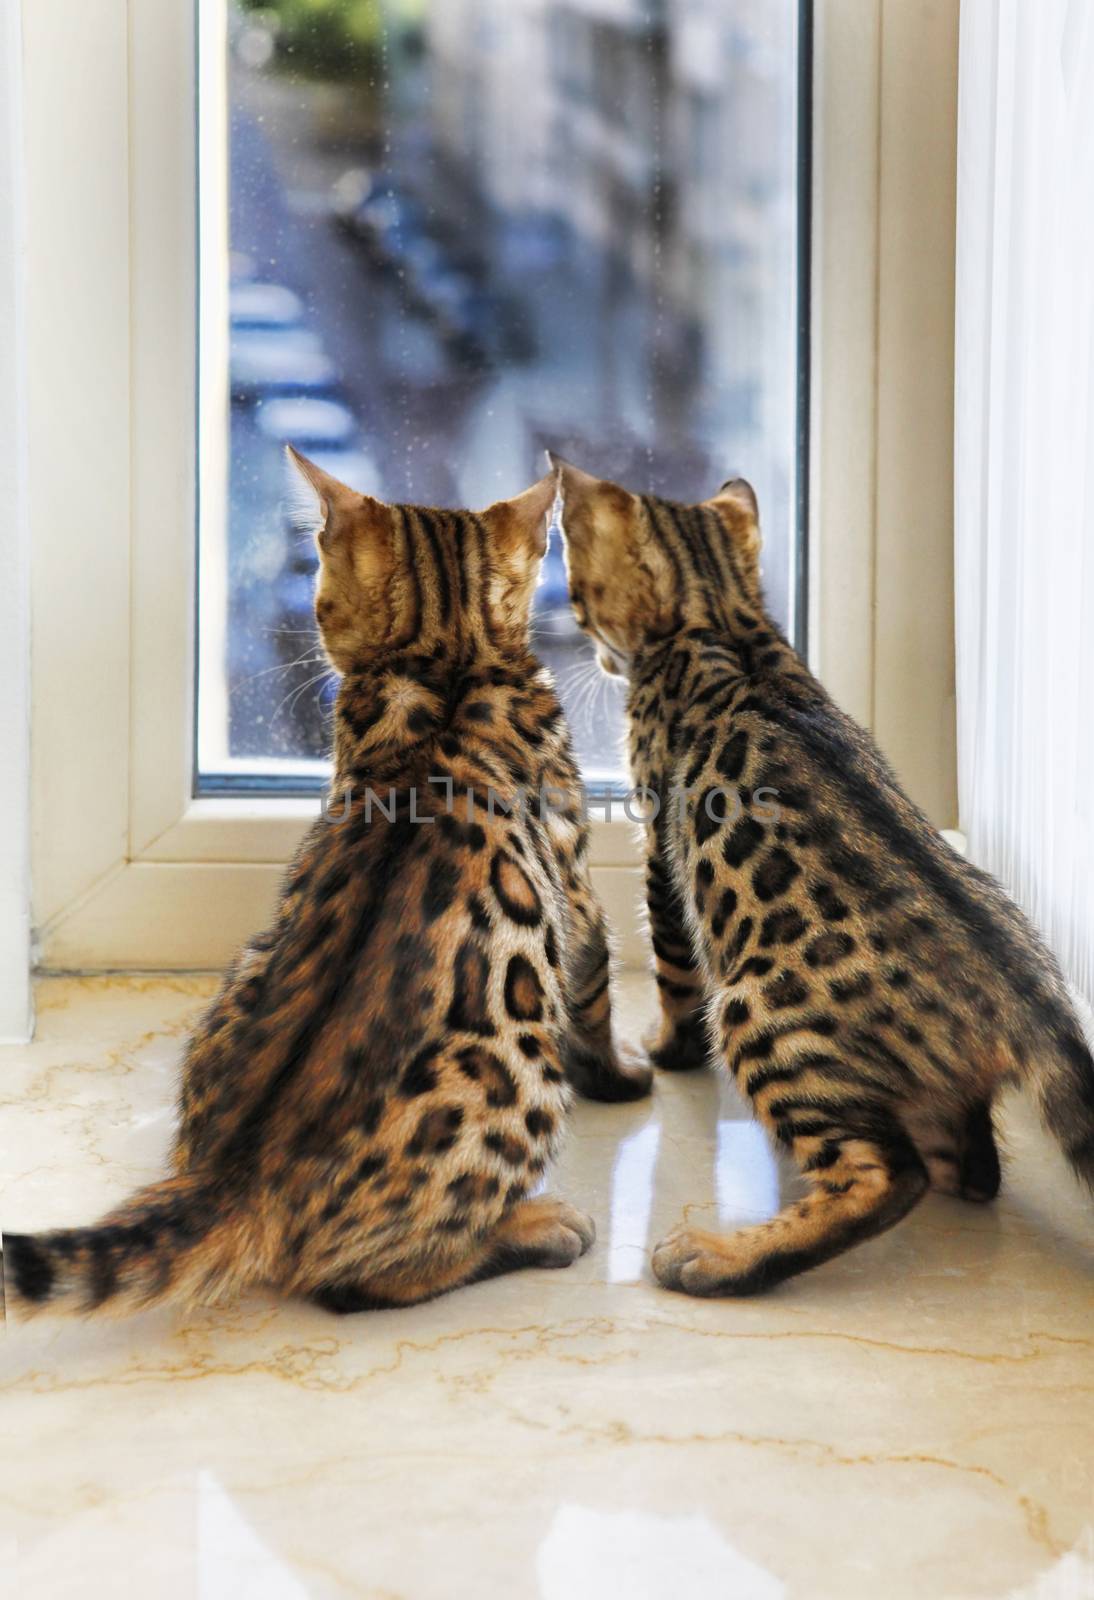 Little Bengal kittens are looking out the window